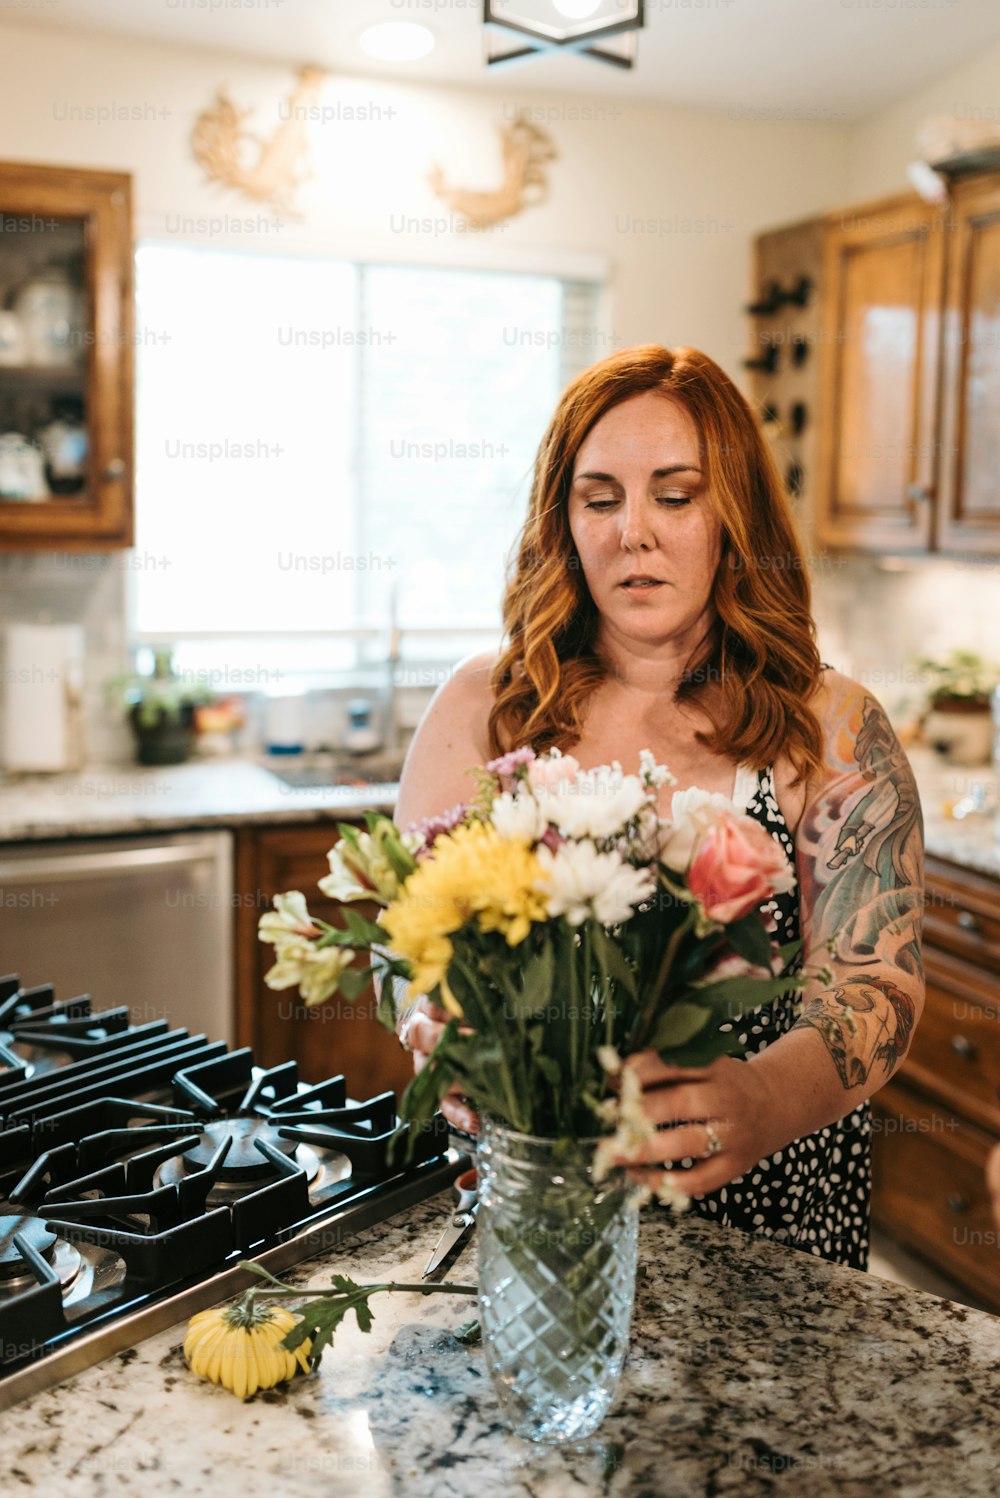 a woman standing in a kitchen holding a vase of flowers